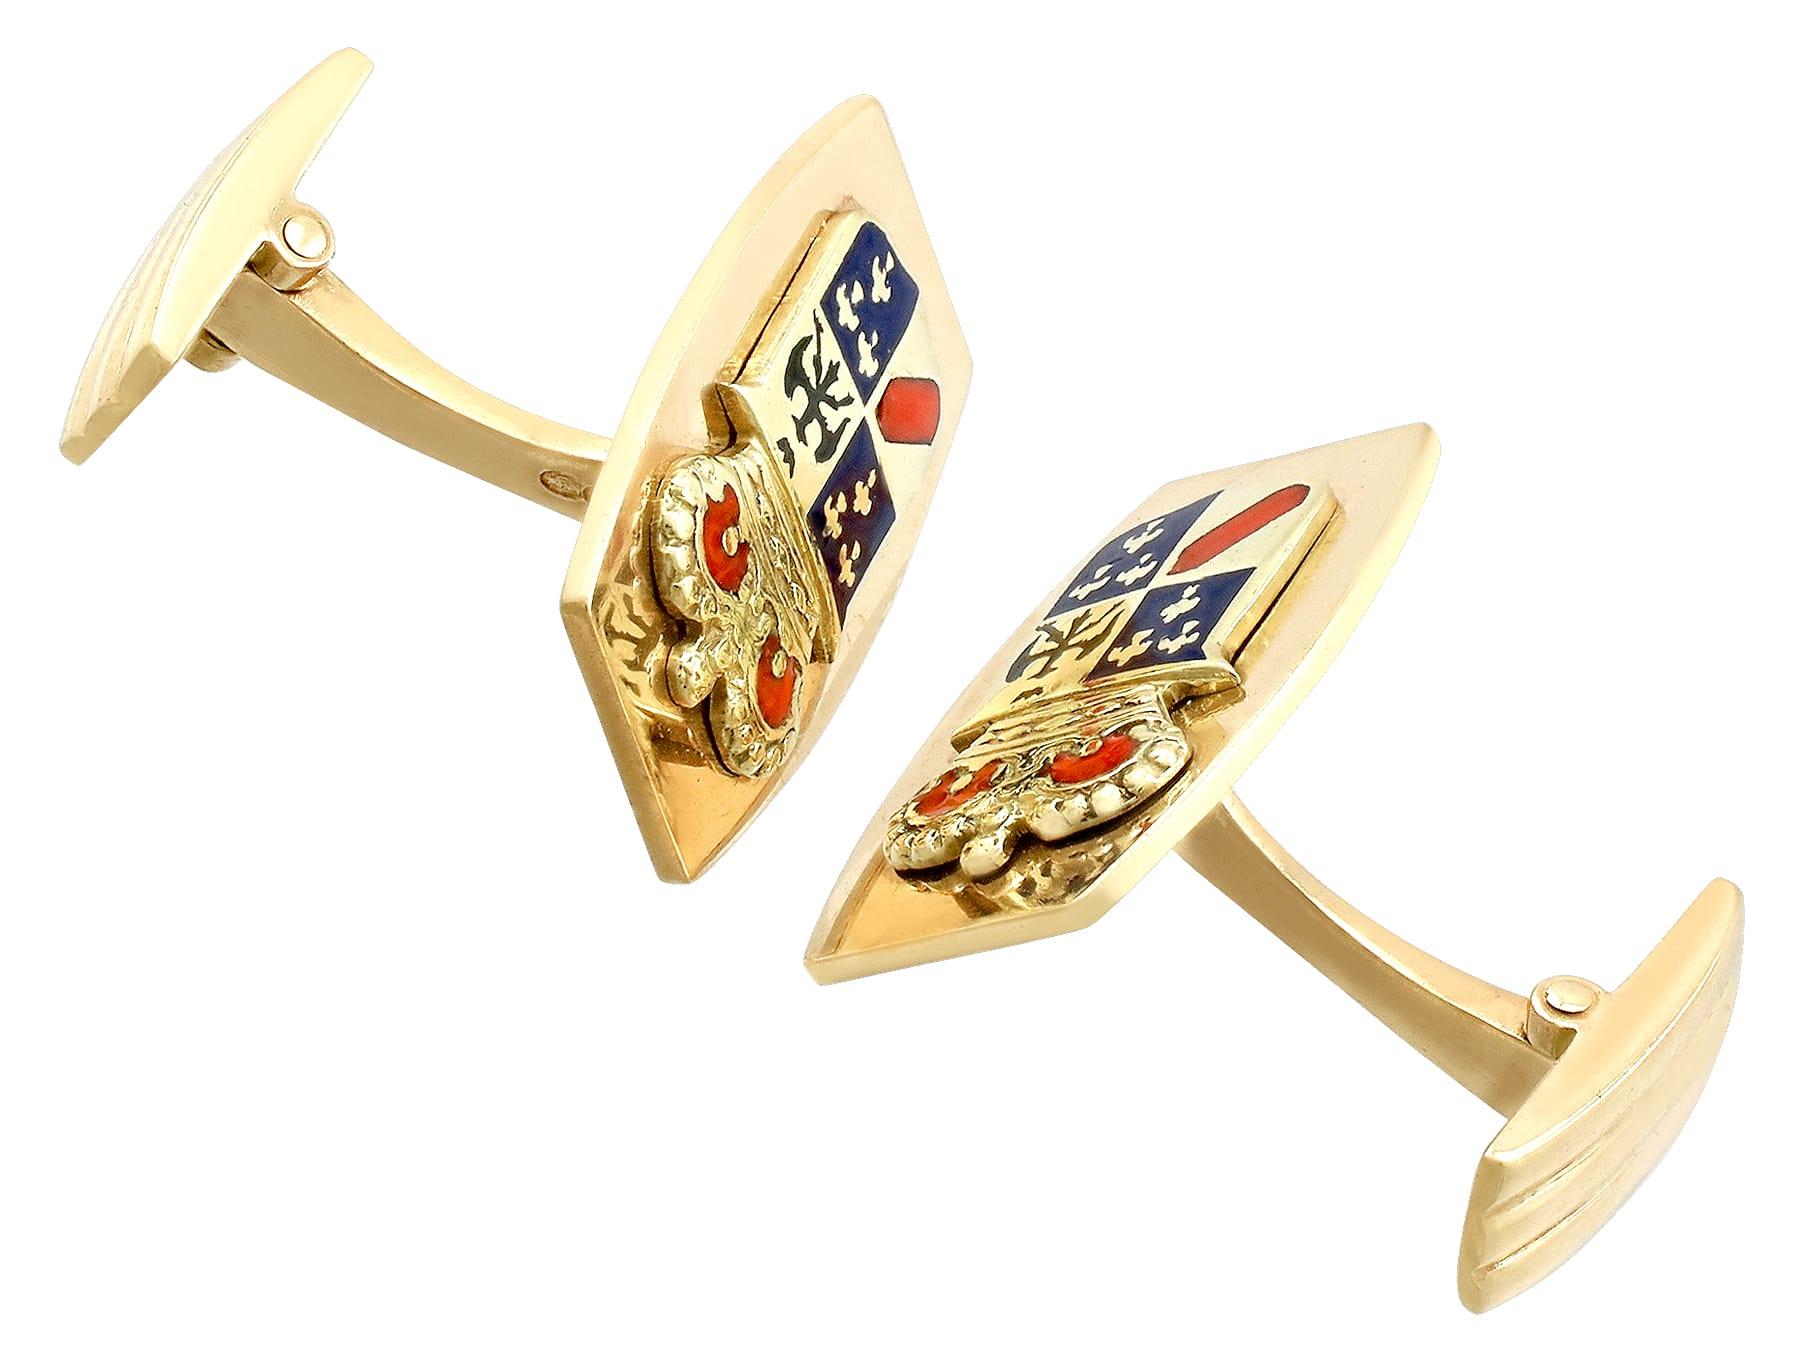 Vintage 1970s Cufflinks in 9K Yellow Gold and Enamel In Excellent Condition For Sale In Jesmond, Newcastle Upon Tyne